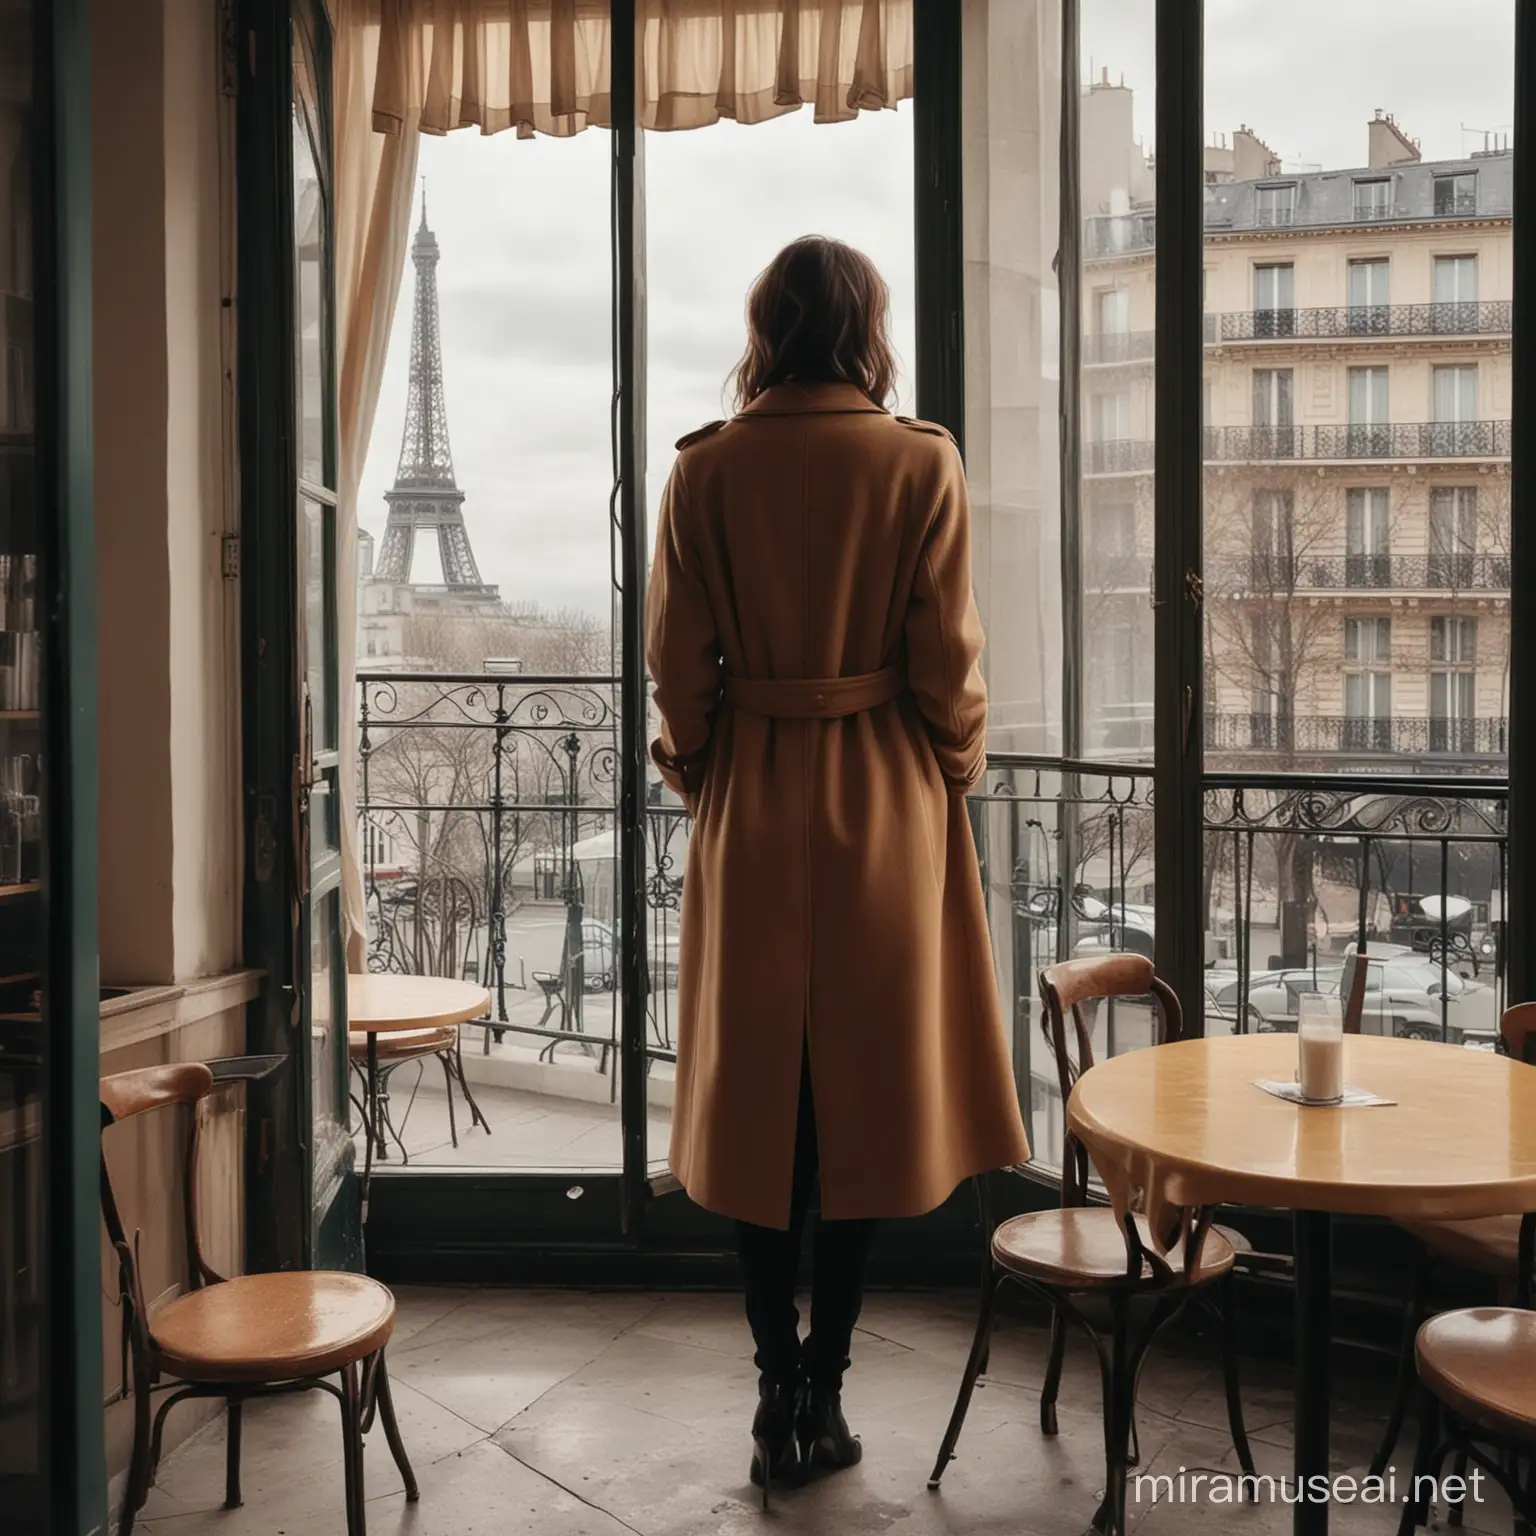 color picture of a mysterious woman standing inside a French café in Paris, wearing a coat. She must have her hands behind her back, and be looking out of a large window overlooking the Eiffel tower